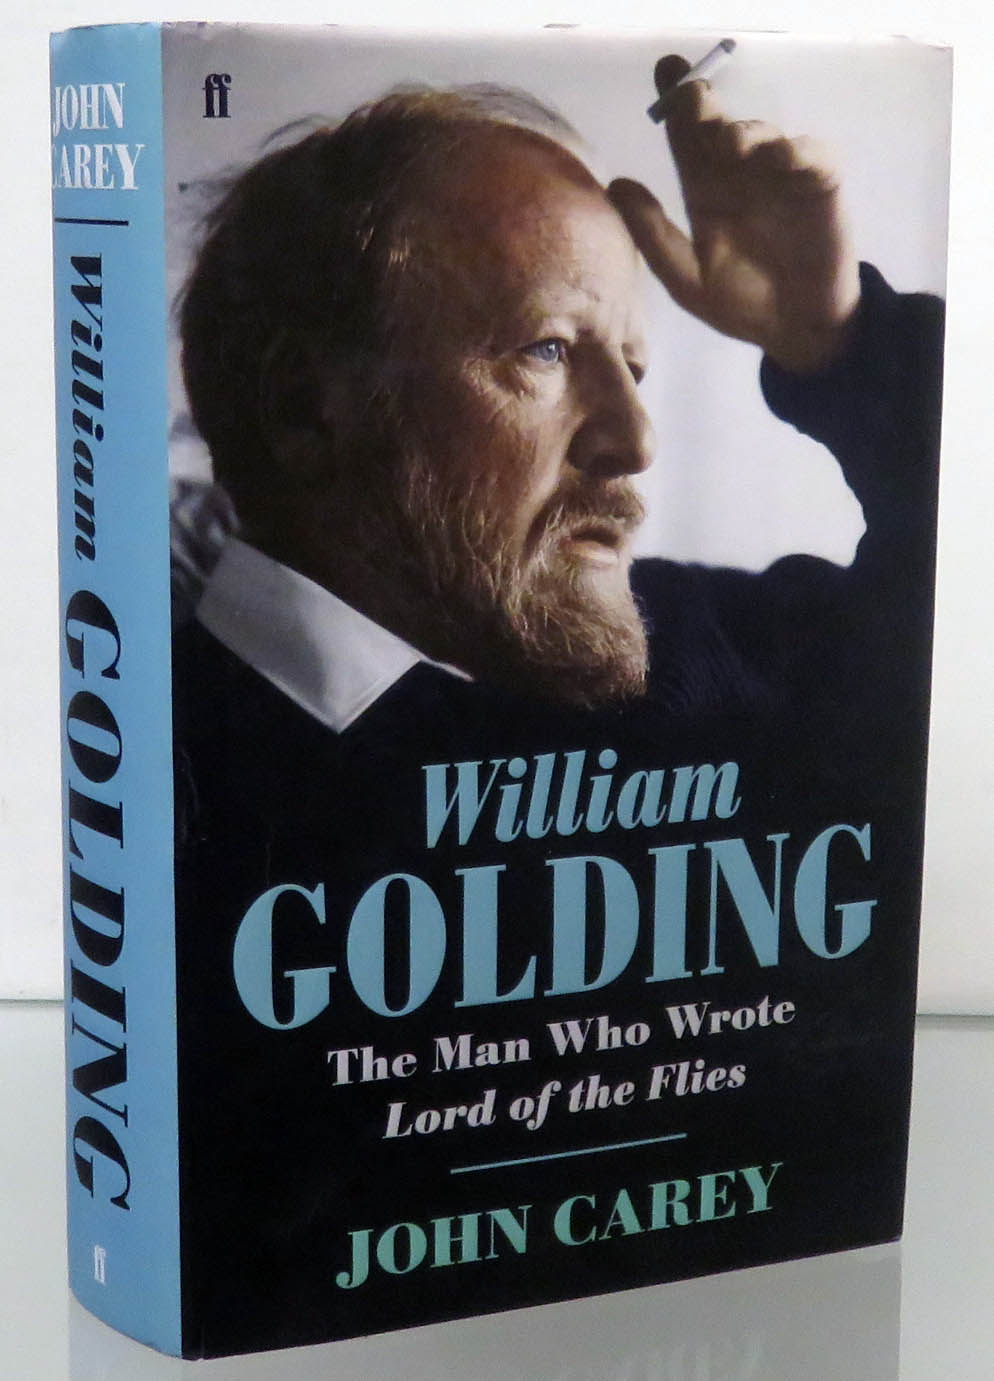 William Golding. The Man Who Wrote Lord of the Flies 